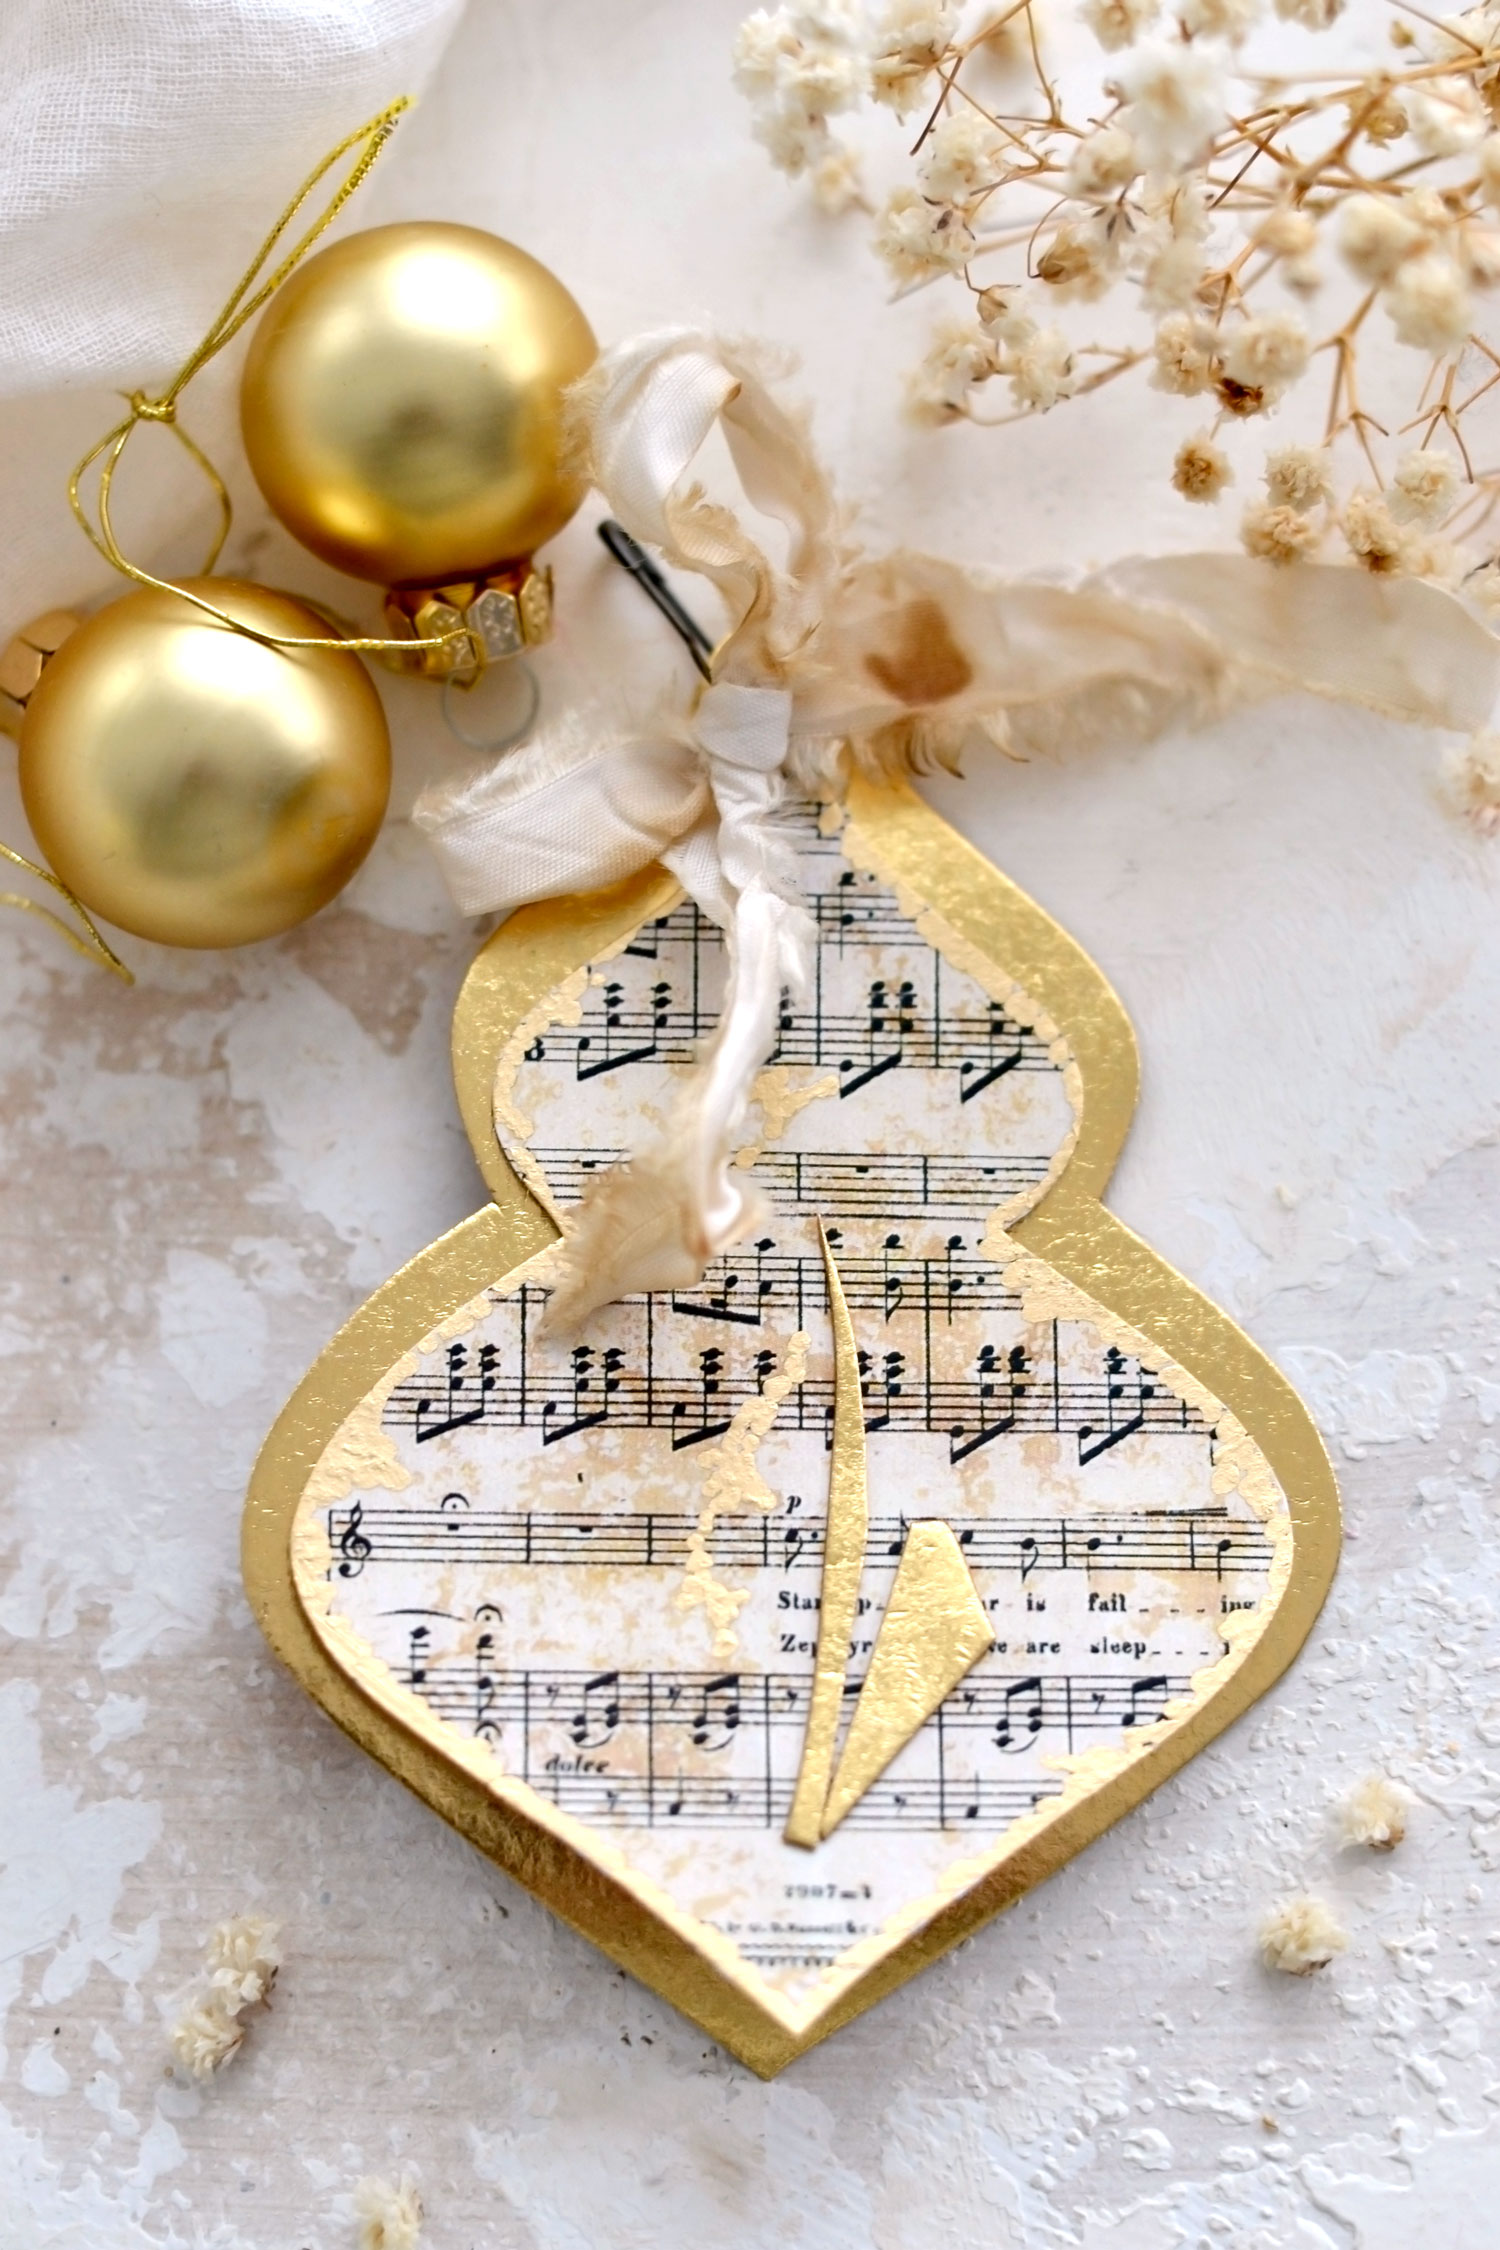 Vintage Christmas ornament with gold touches